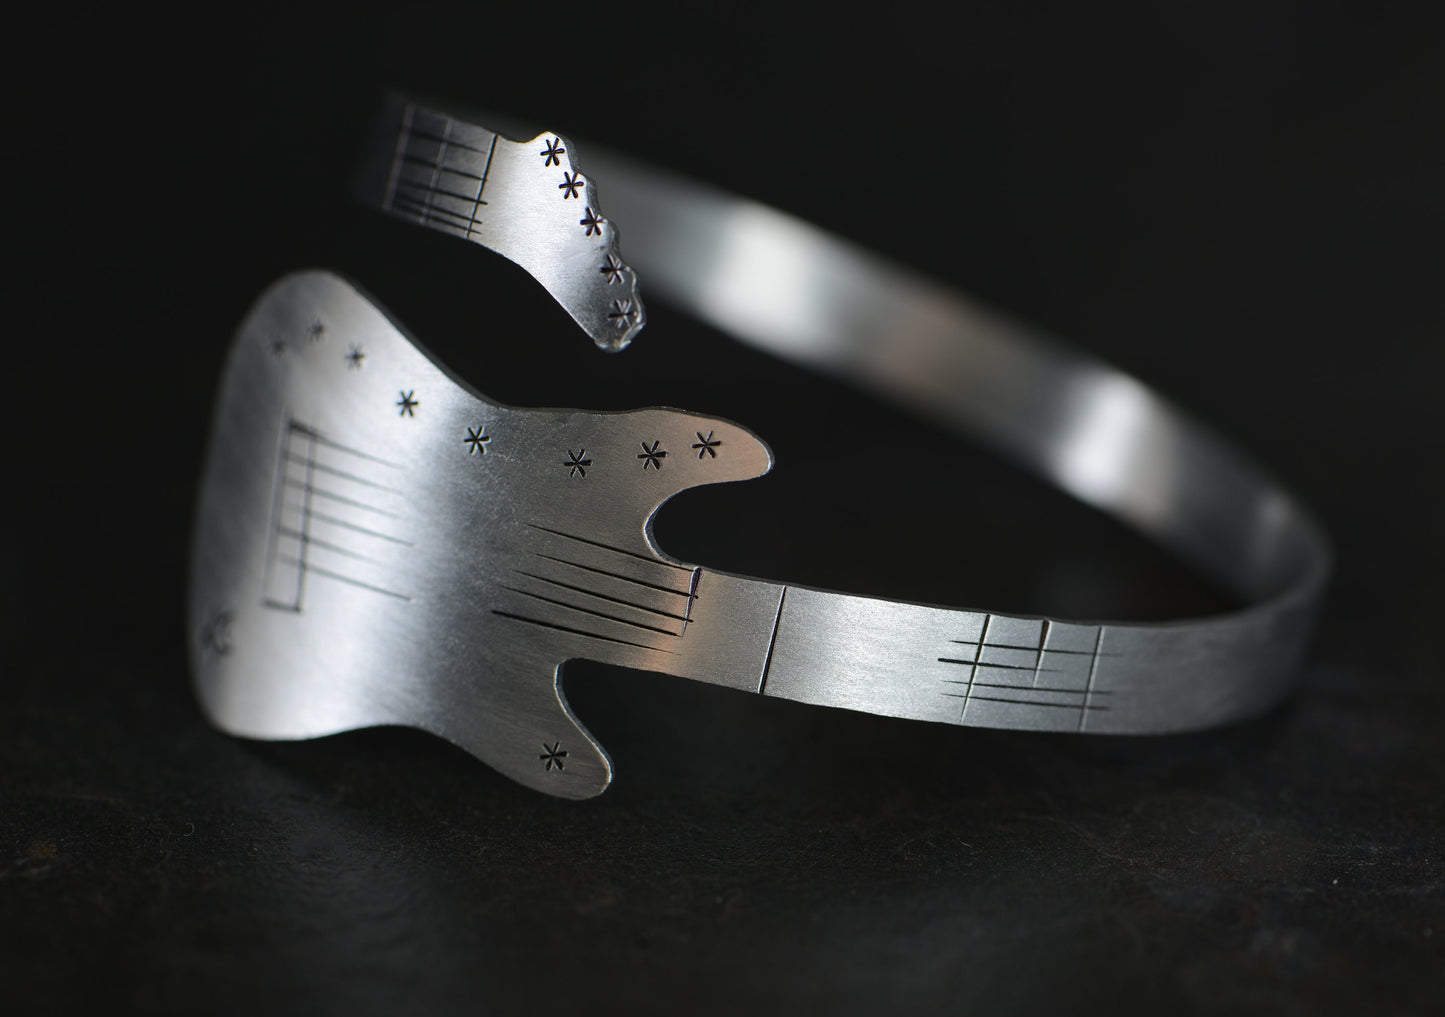 Guitar Bangle Bracelet in Aluminum or 925 Sterling Silver - Also available in copper metals